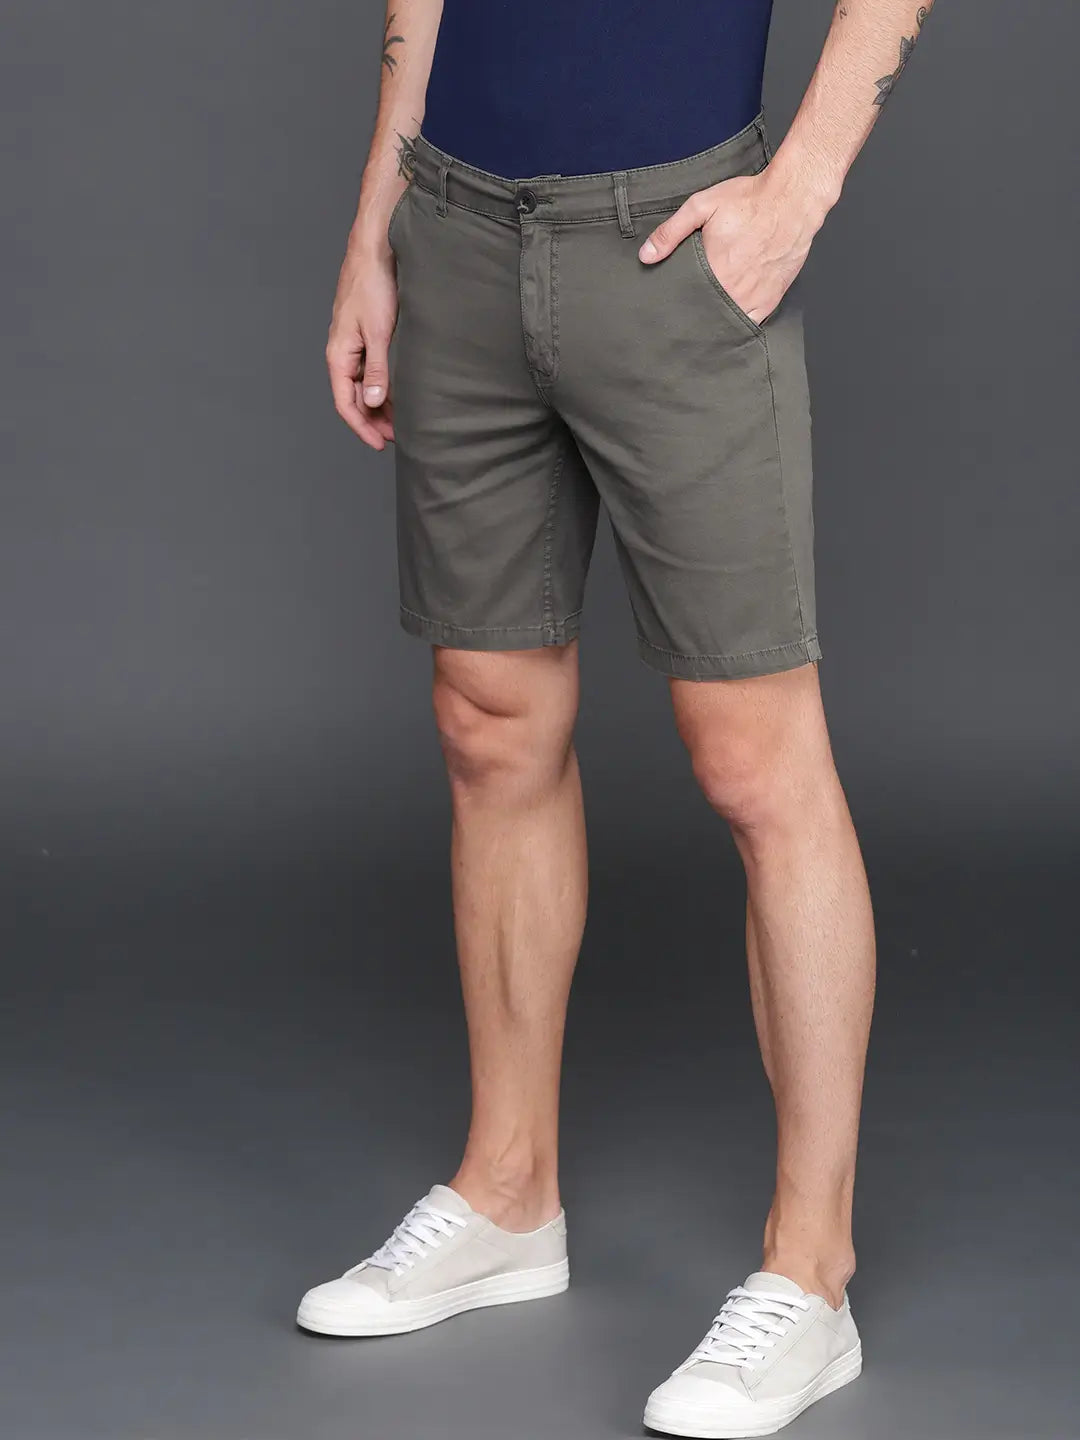 Men Grey Solid Slim Fit Chino Shorts - Back View - AceCart